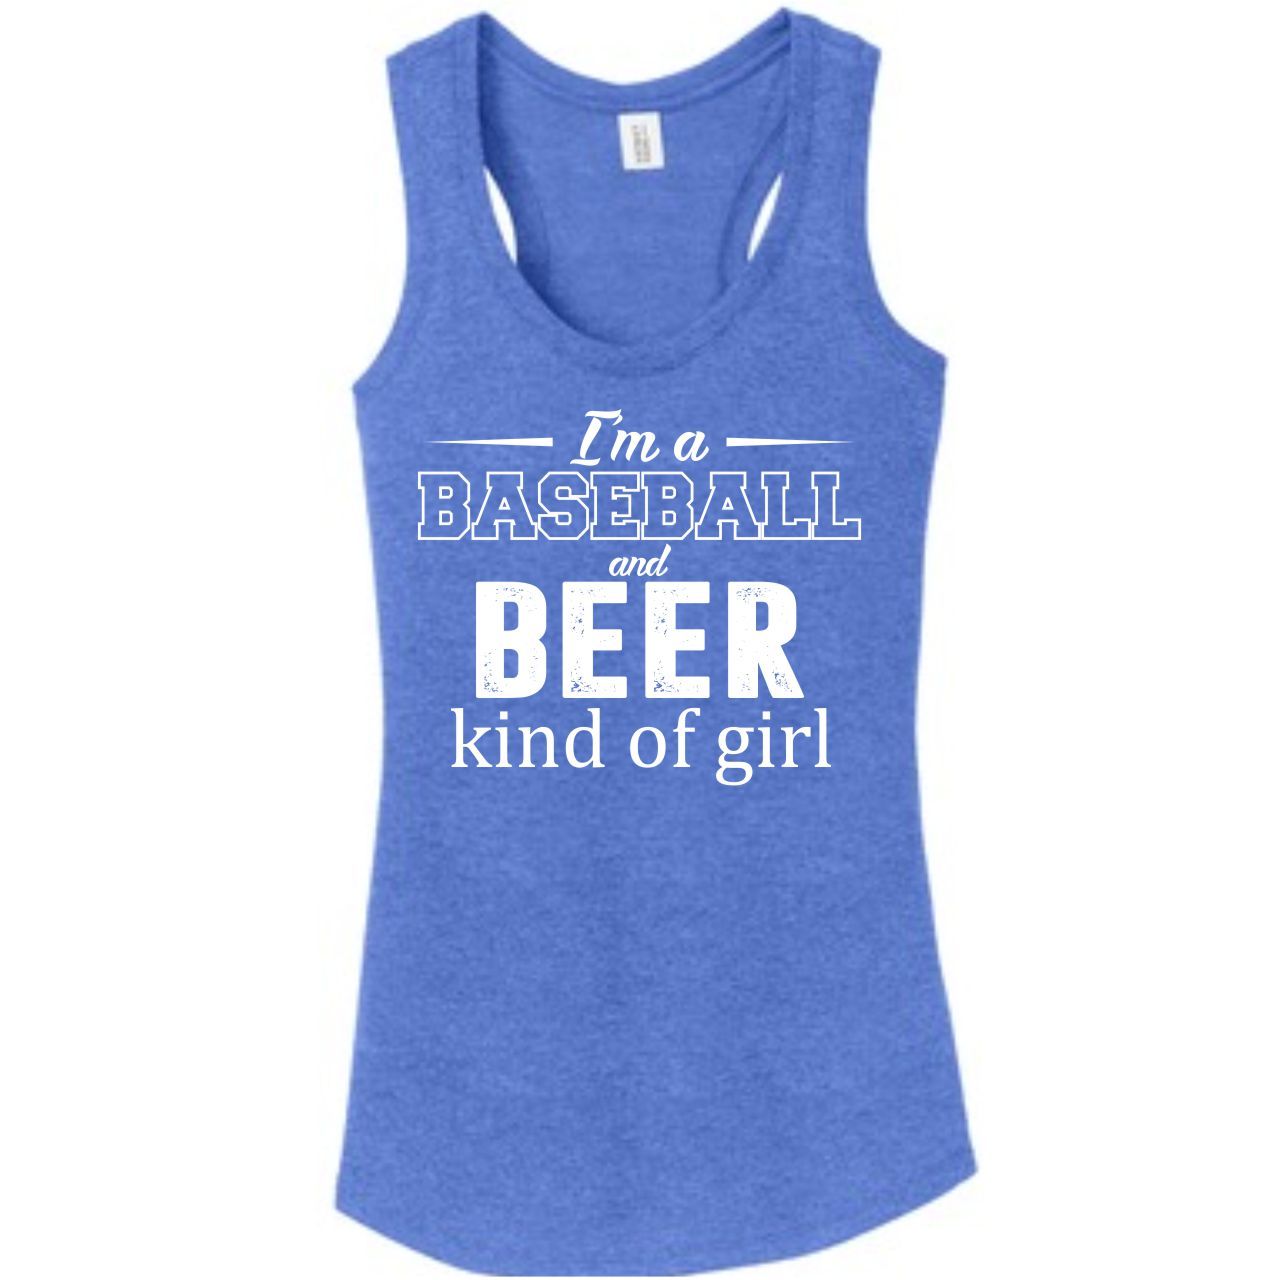 I'm a Baseball and Beer Kind of Girl - Ladies Racerback Tank - The Graphic Tee